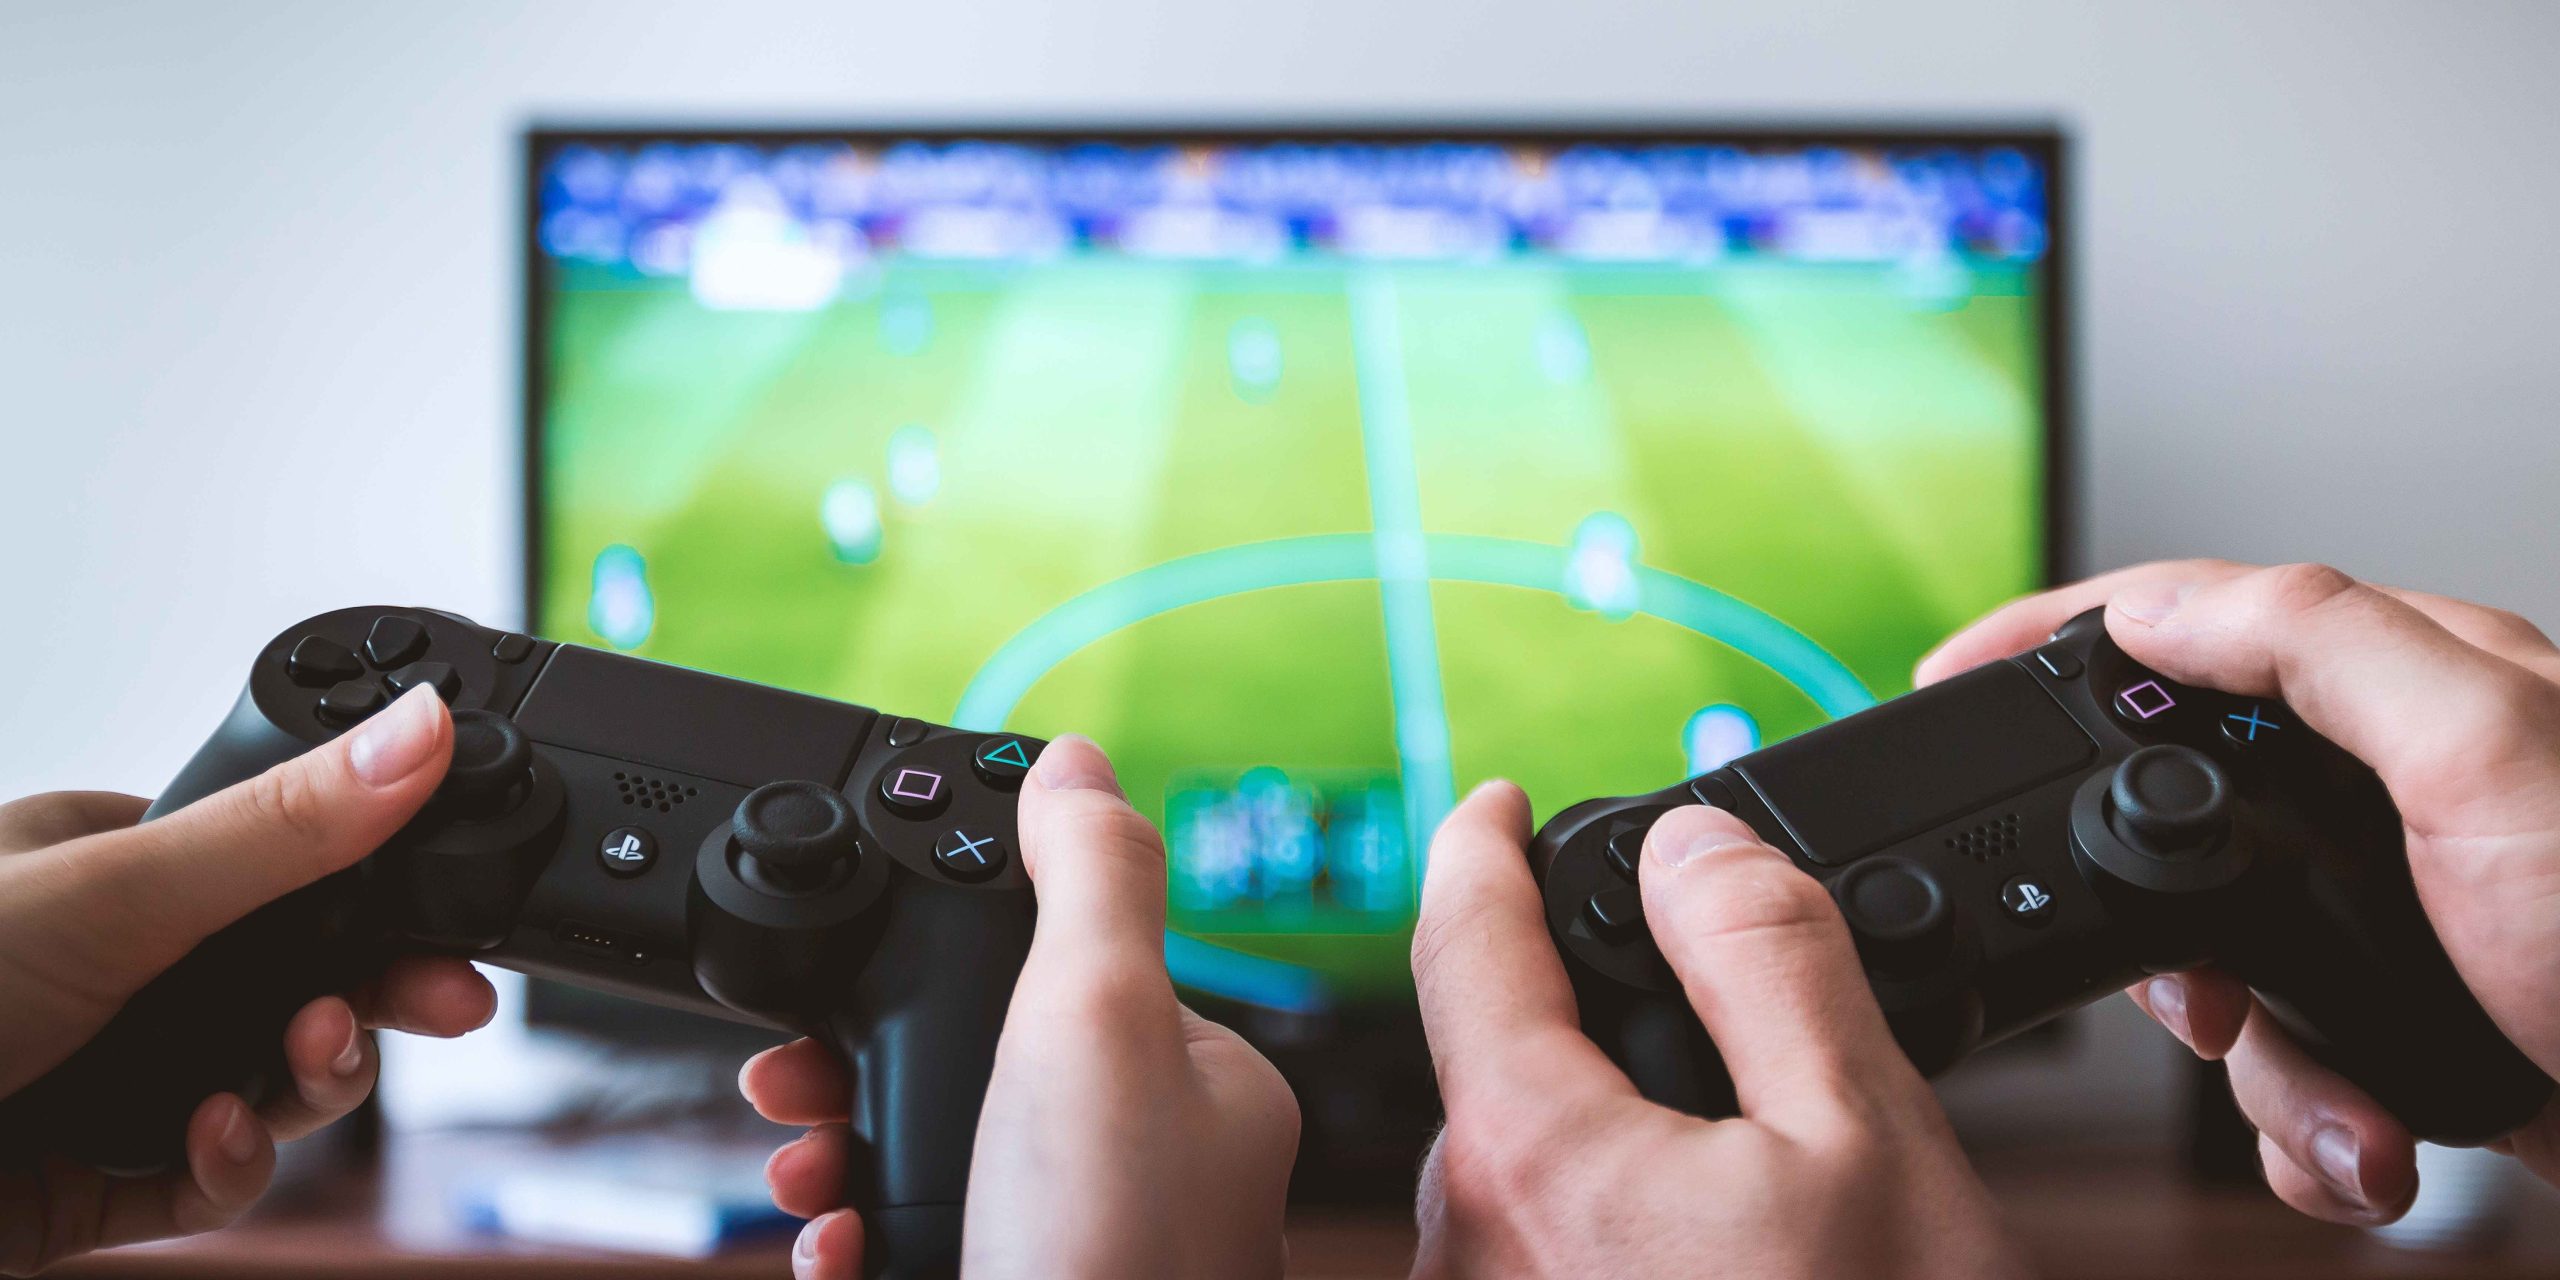 How To Play Games On Smart TV Without Console